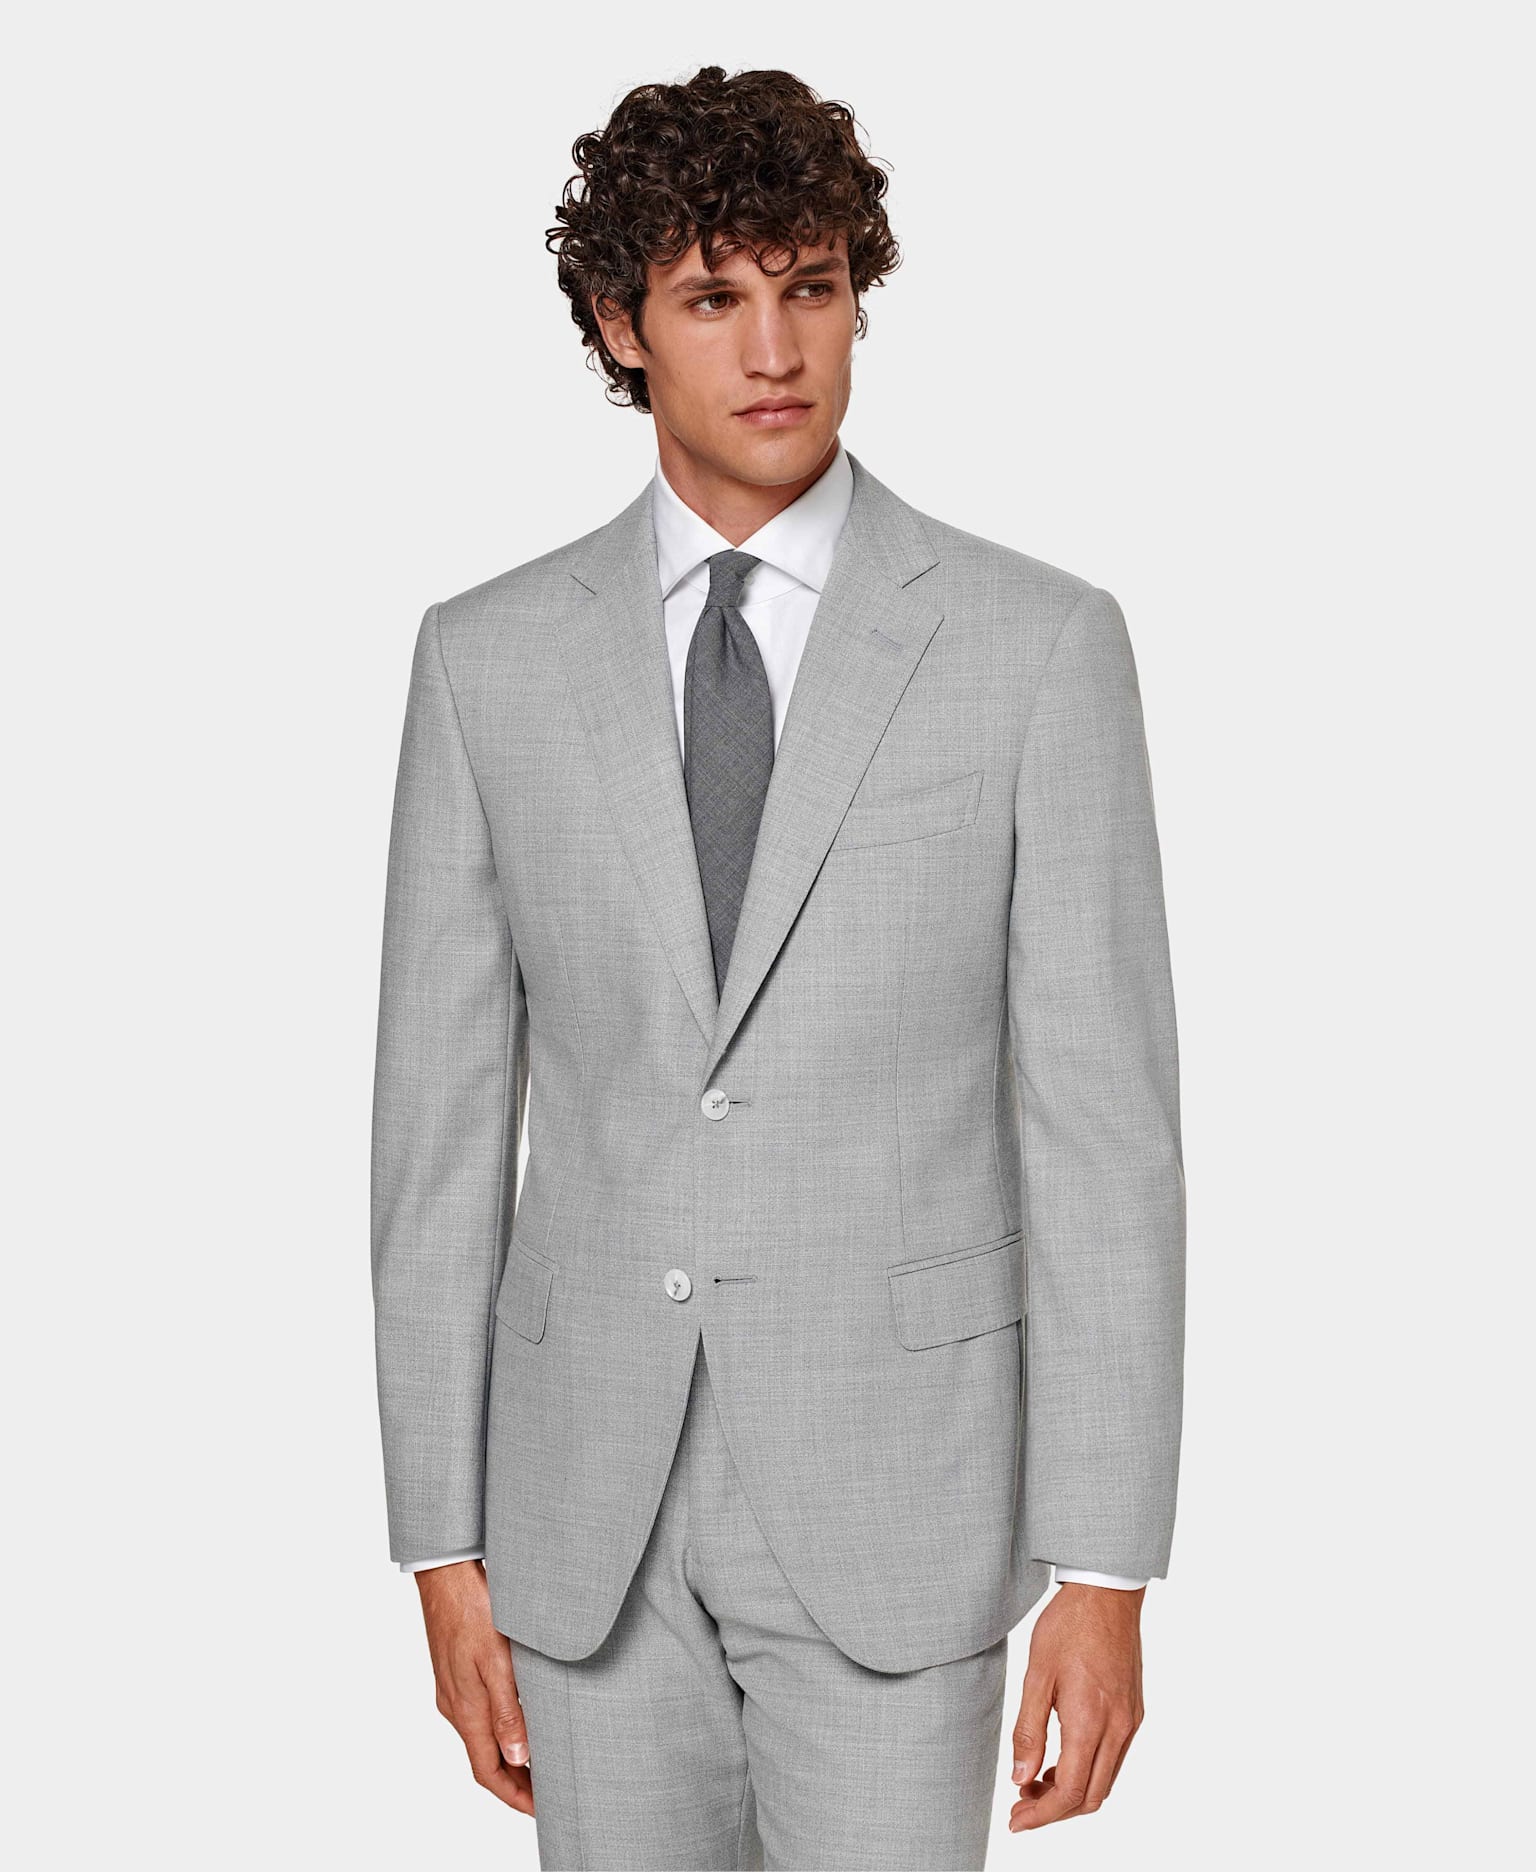 Grey suit with flap pockets and notch lapel, worn with white shirt and grey tie.